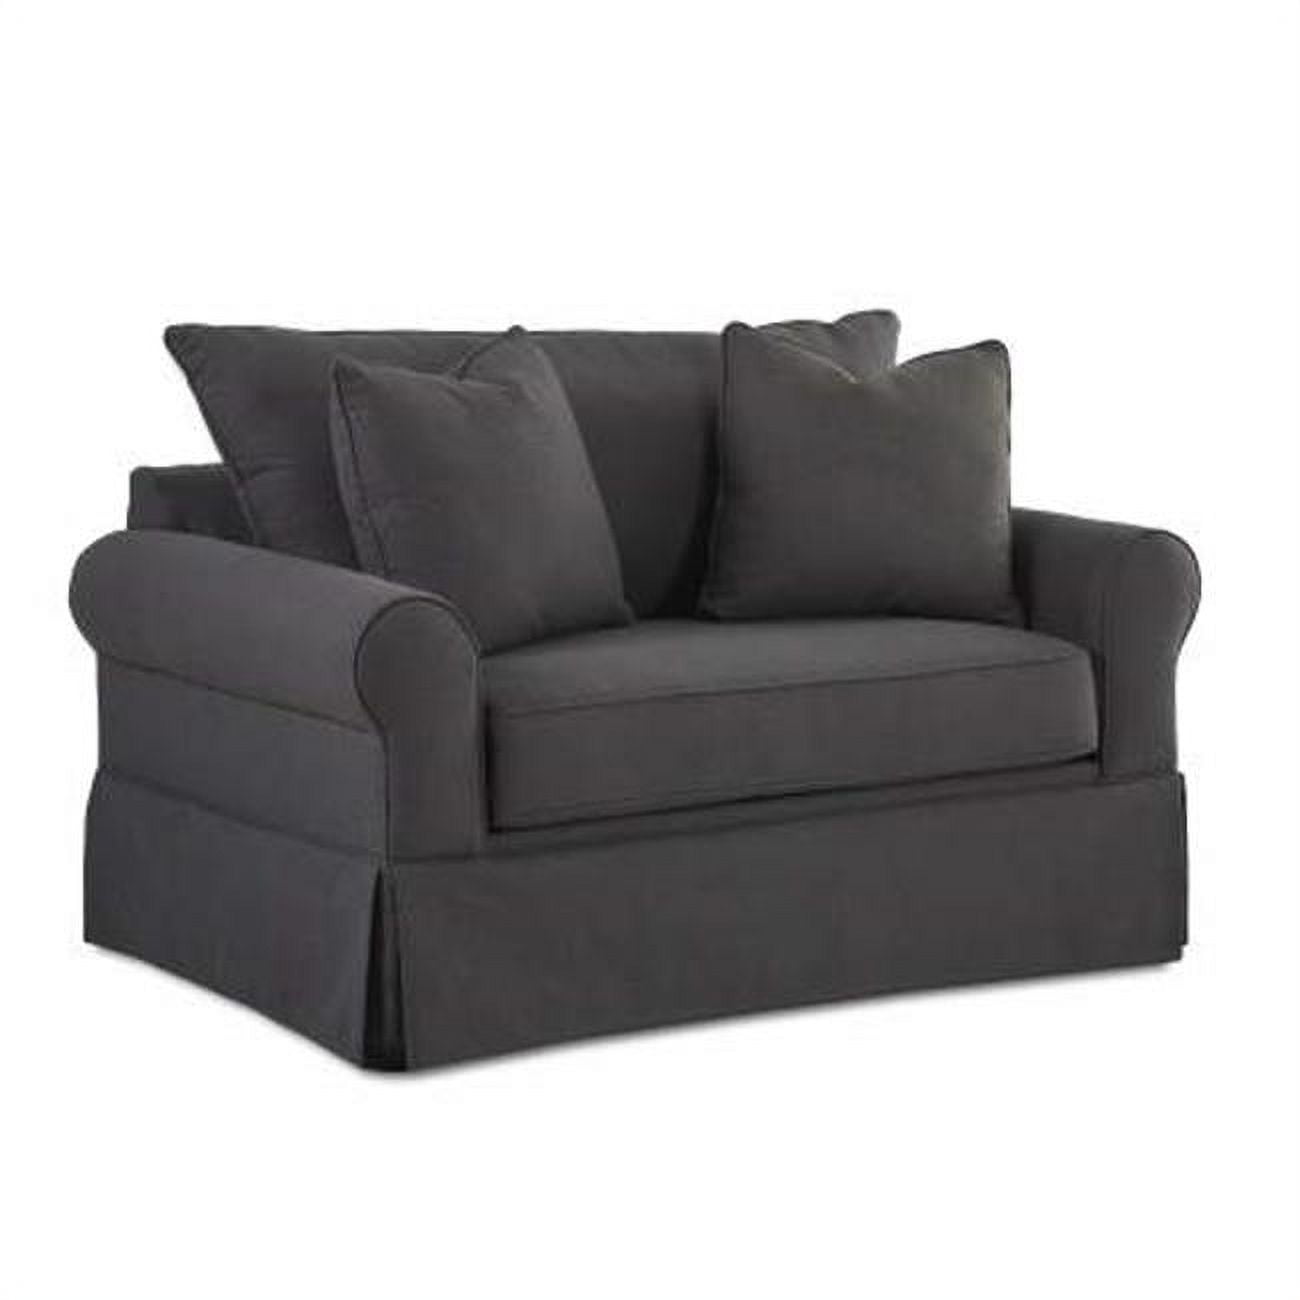 Klaussner Furniture Uphol Sleeper 12013376911 Brook 36 35 Chair in. x Polyester 53 Dreamquest with x